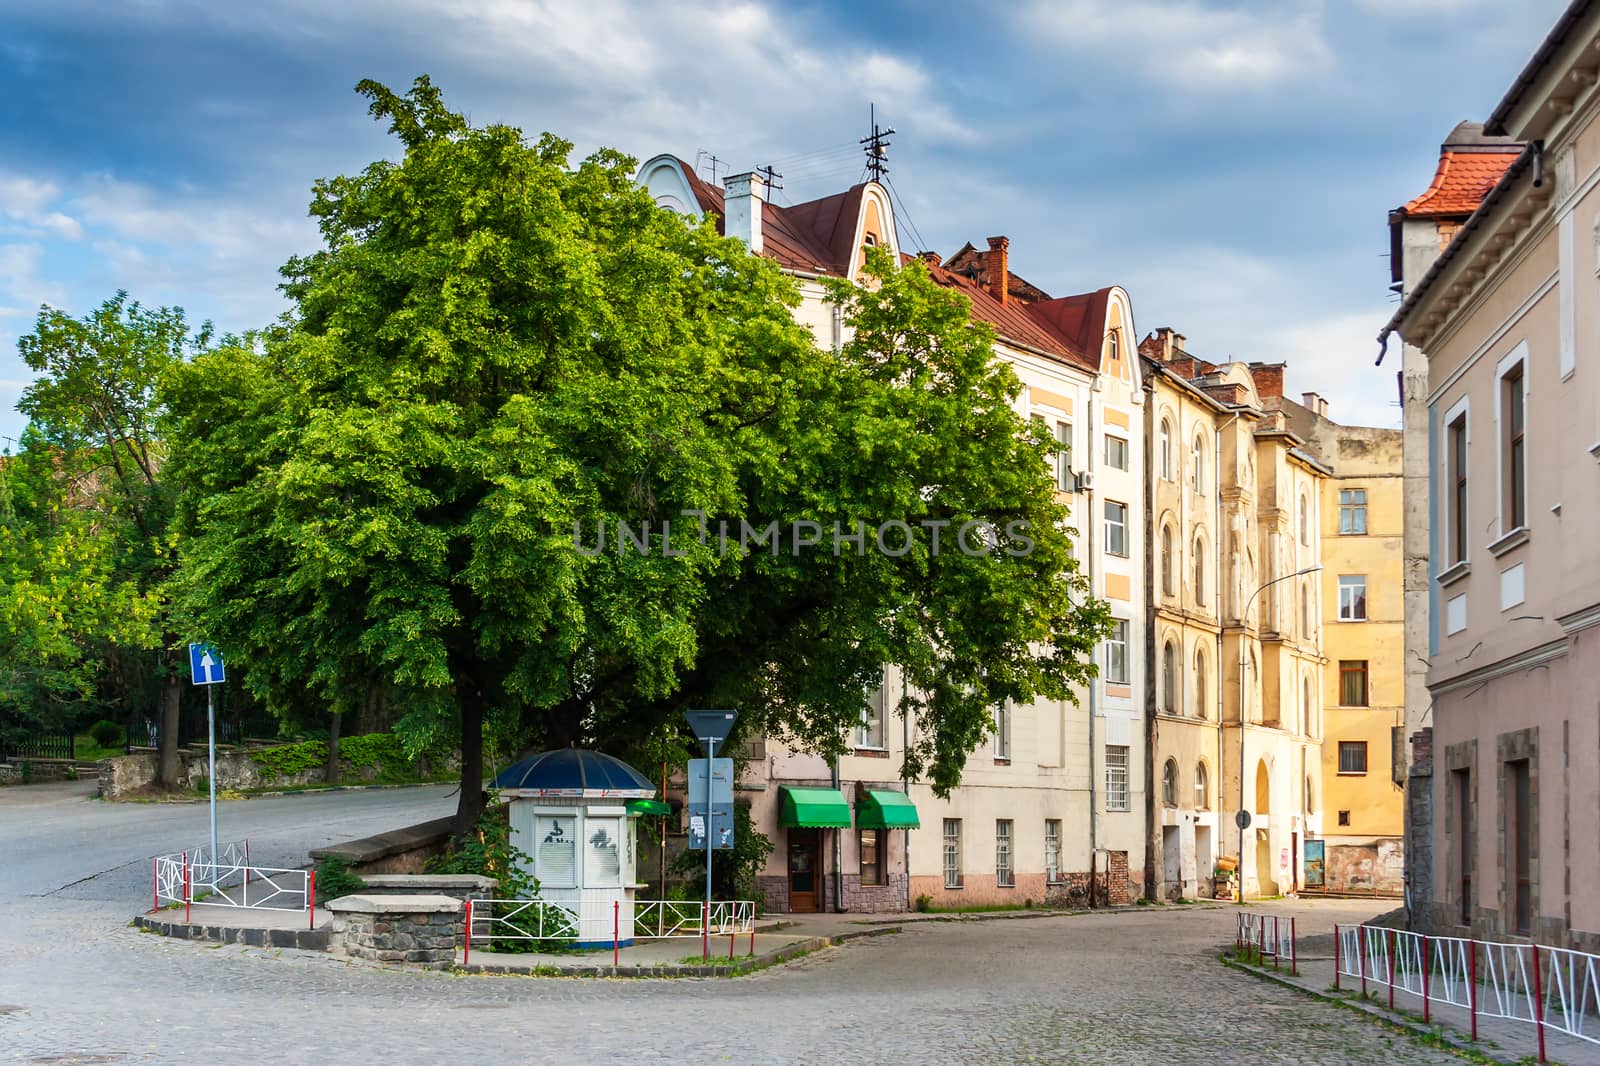 area of ​​the old city near the park is still asleep in the morning light, wrapped by cobbled street.